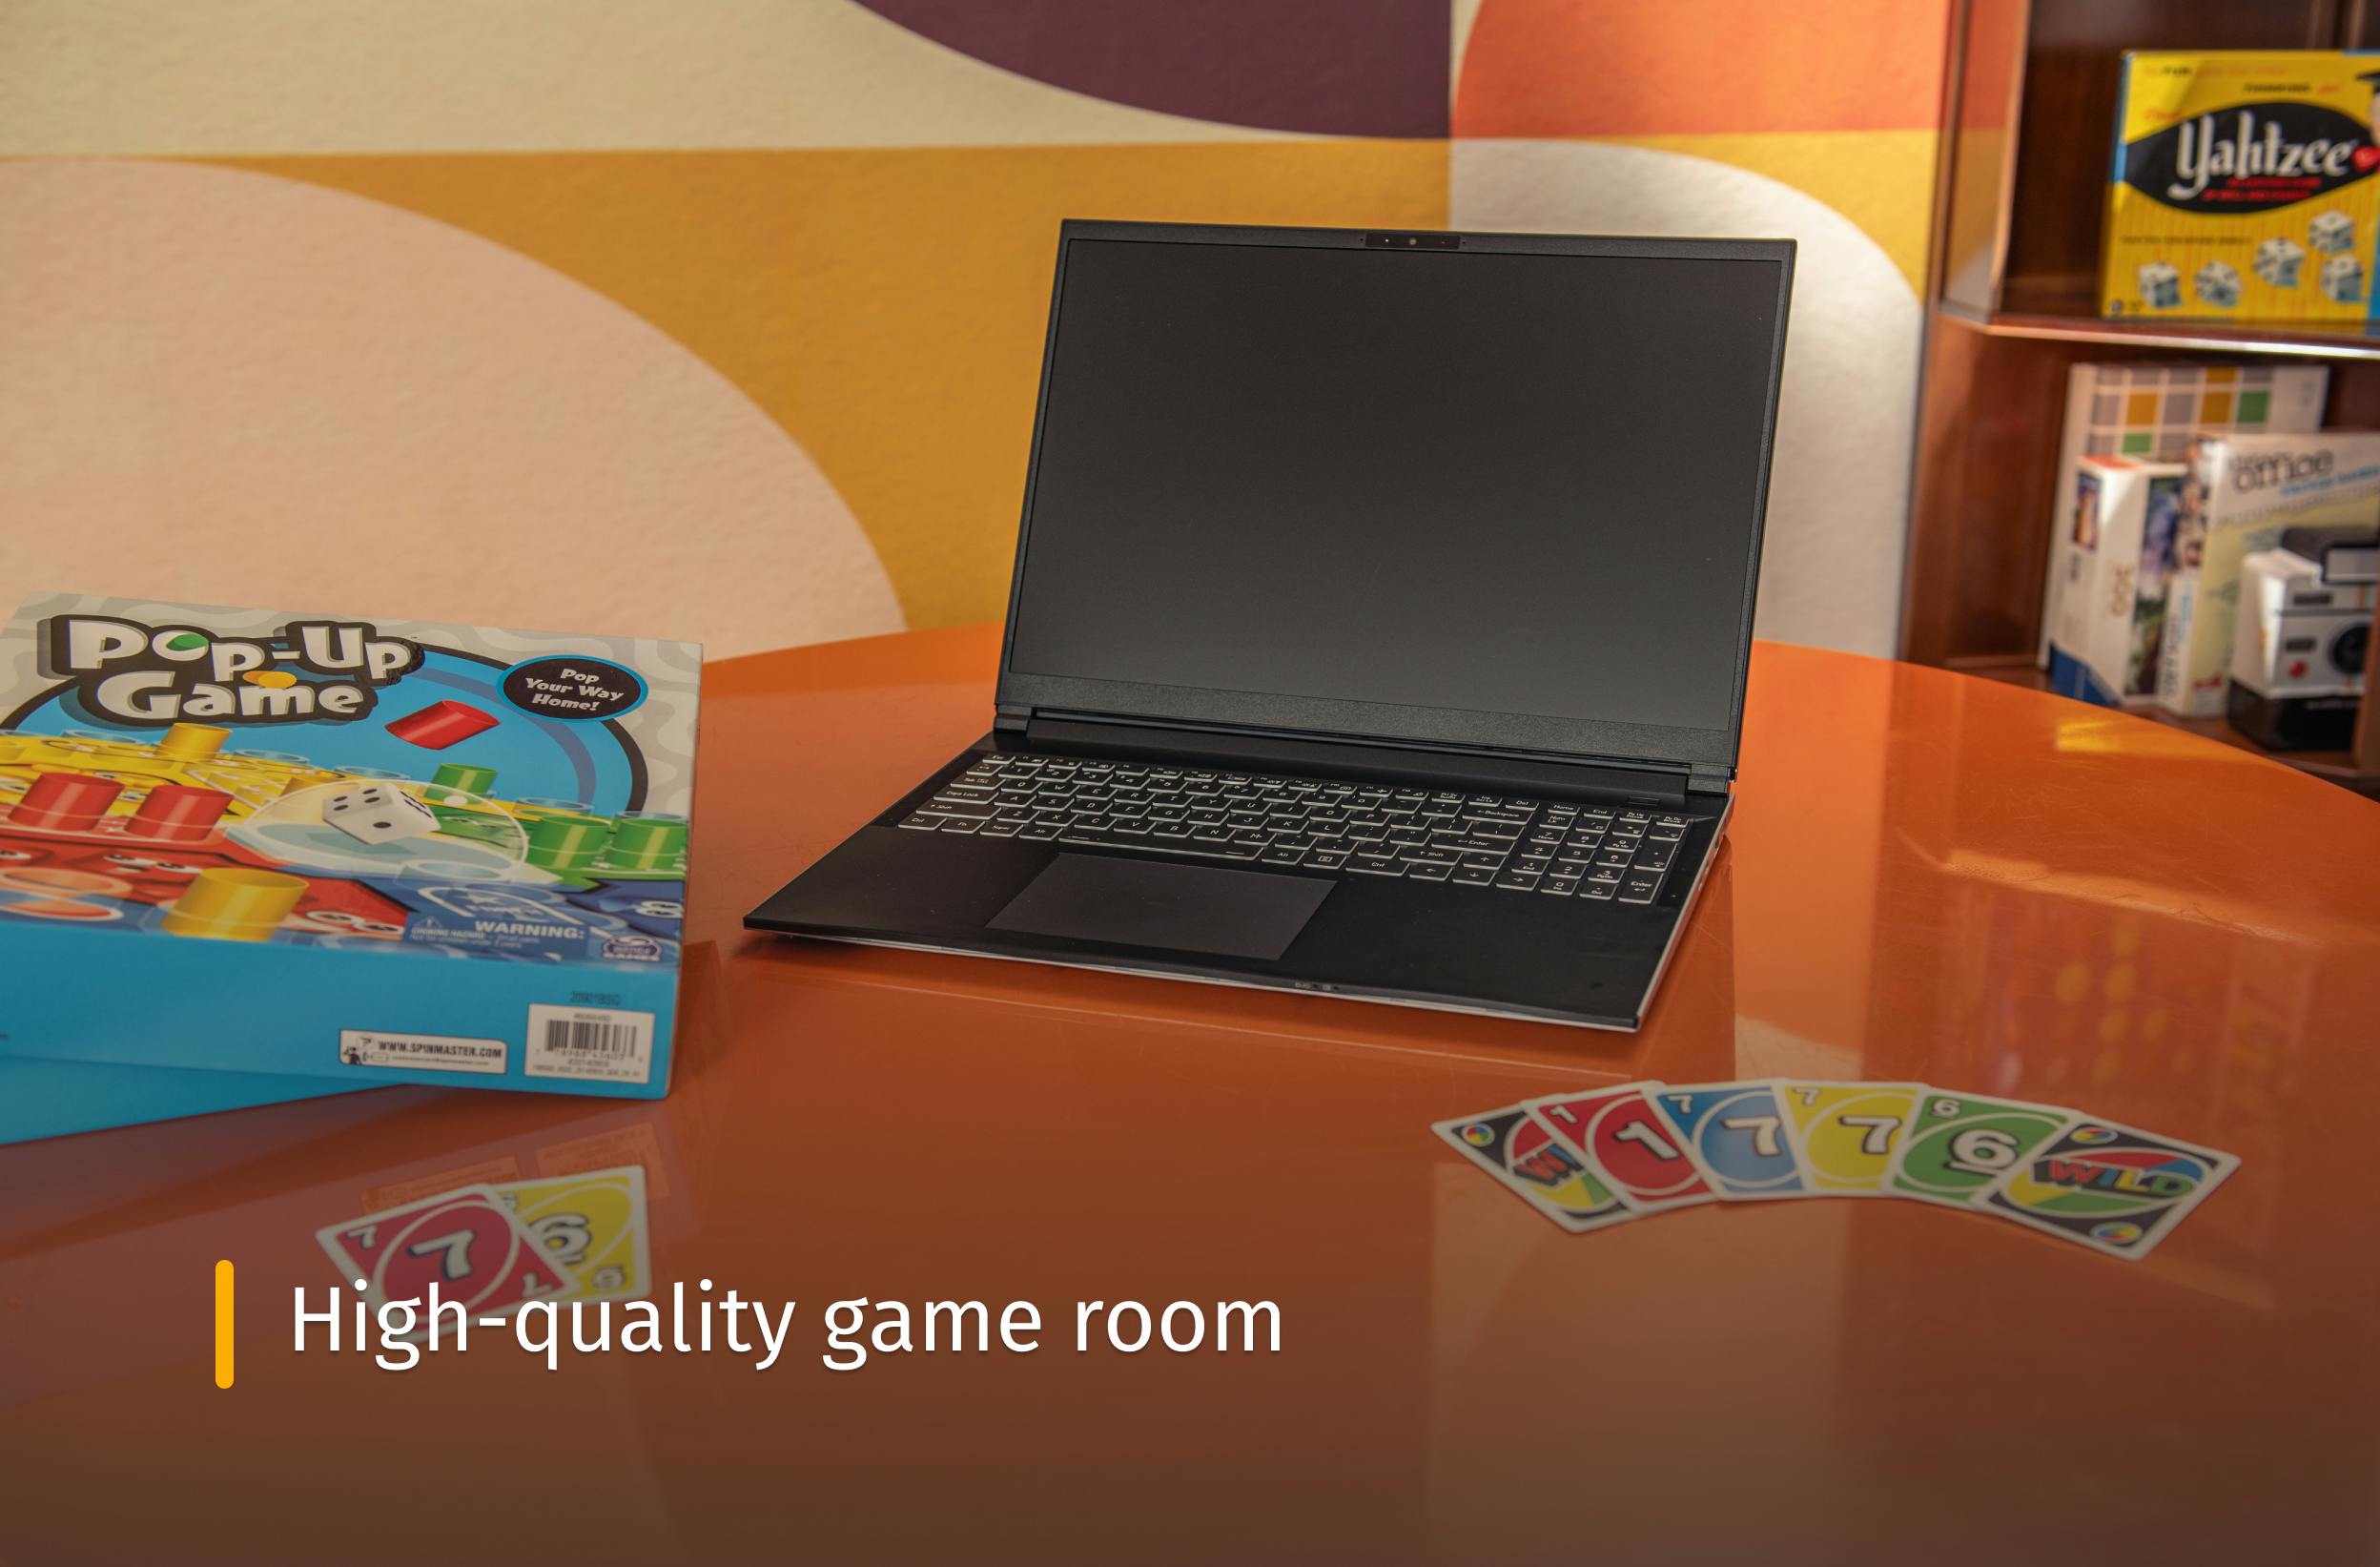 Darter Pro on a game table with cards and text that reads "High-quality game room"